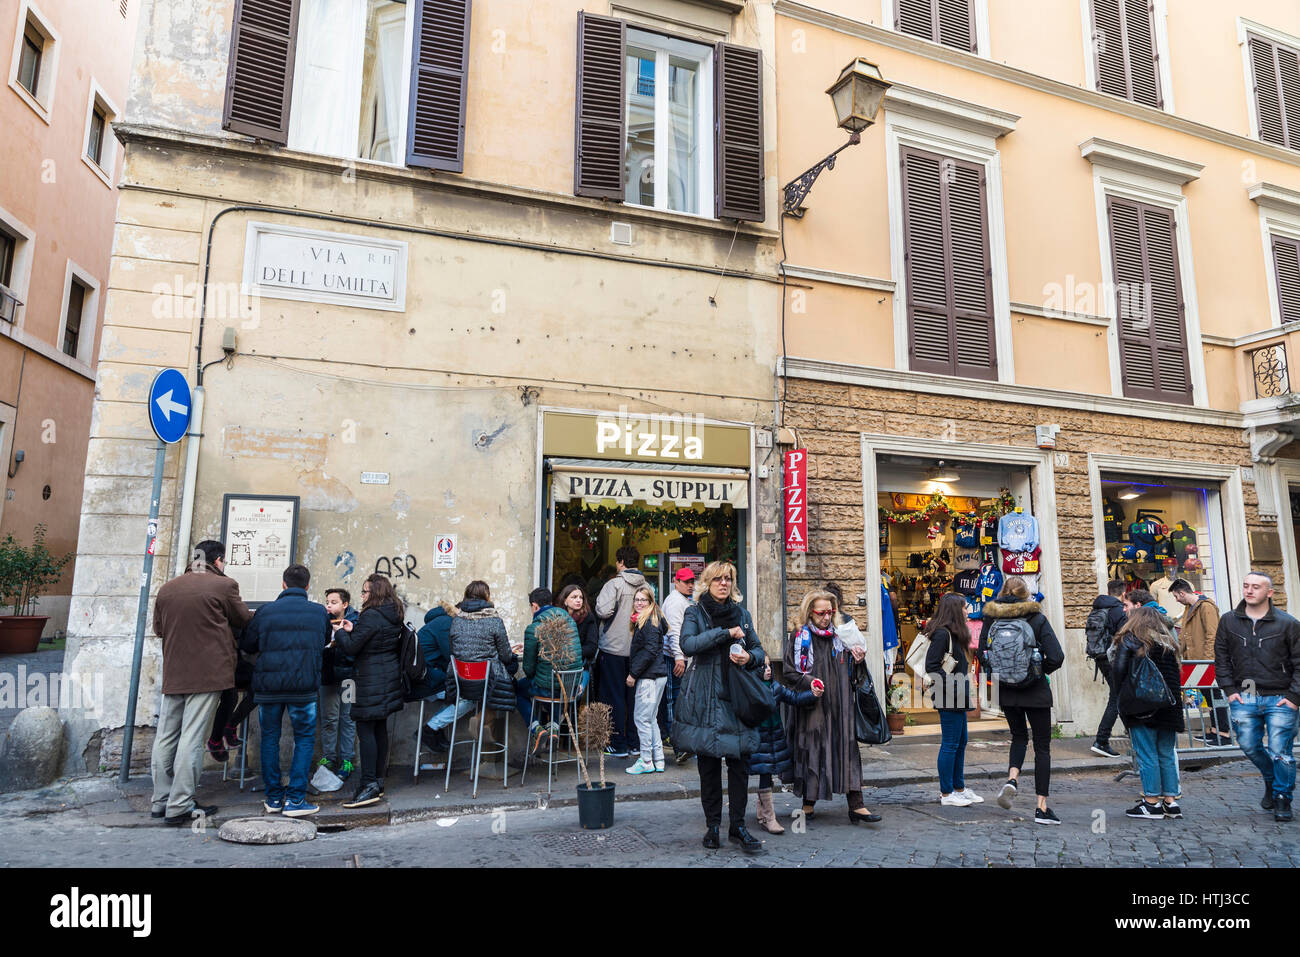 Rome, Italy - December 31, 2016: People walking and eating pizza in a bar on the street in the historical center of Rome, Italy Stock Photo